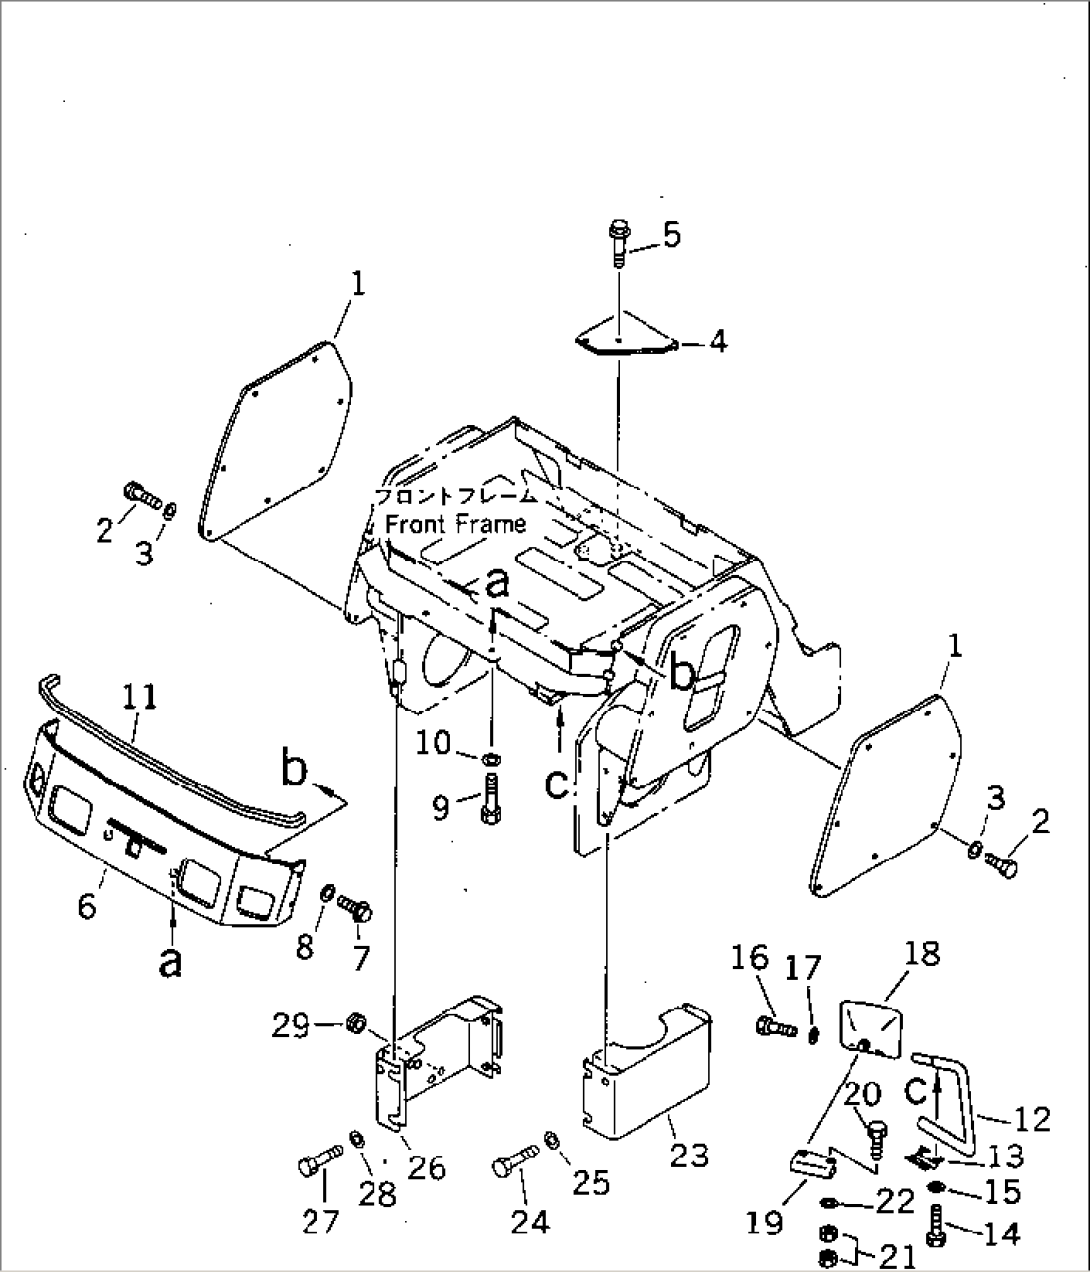 FRONT FRAME COVER(#10003-)